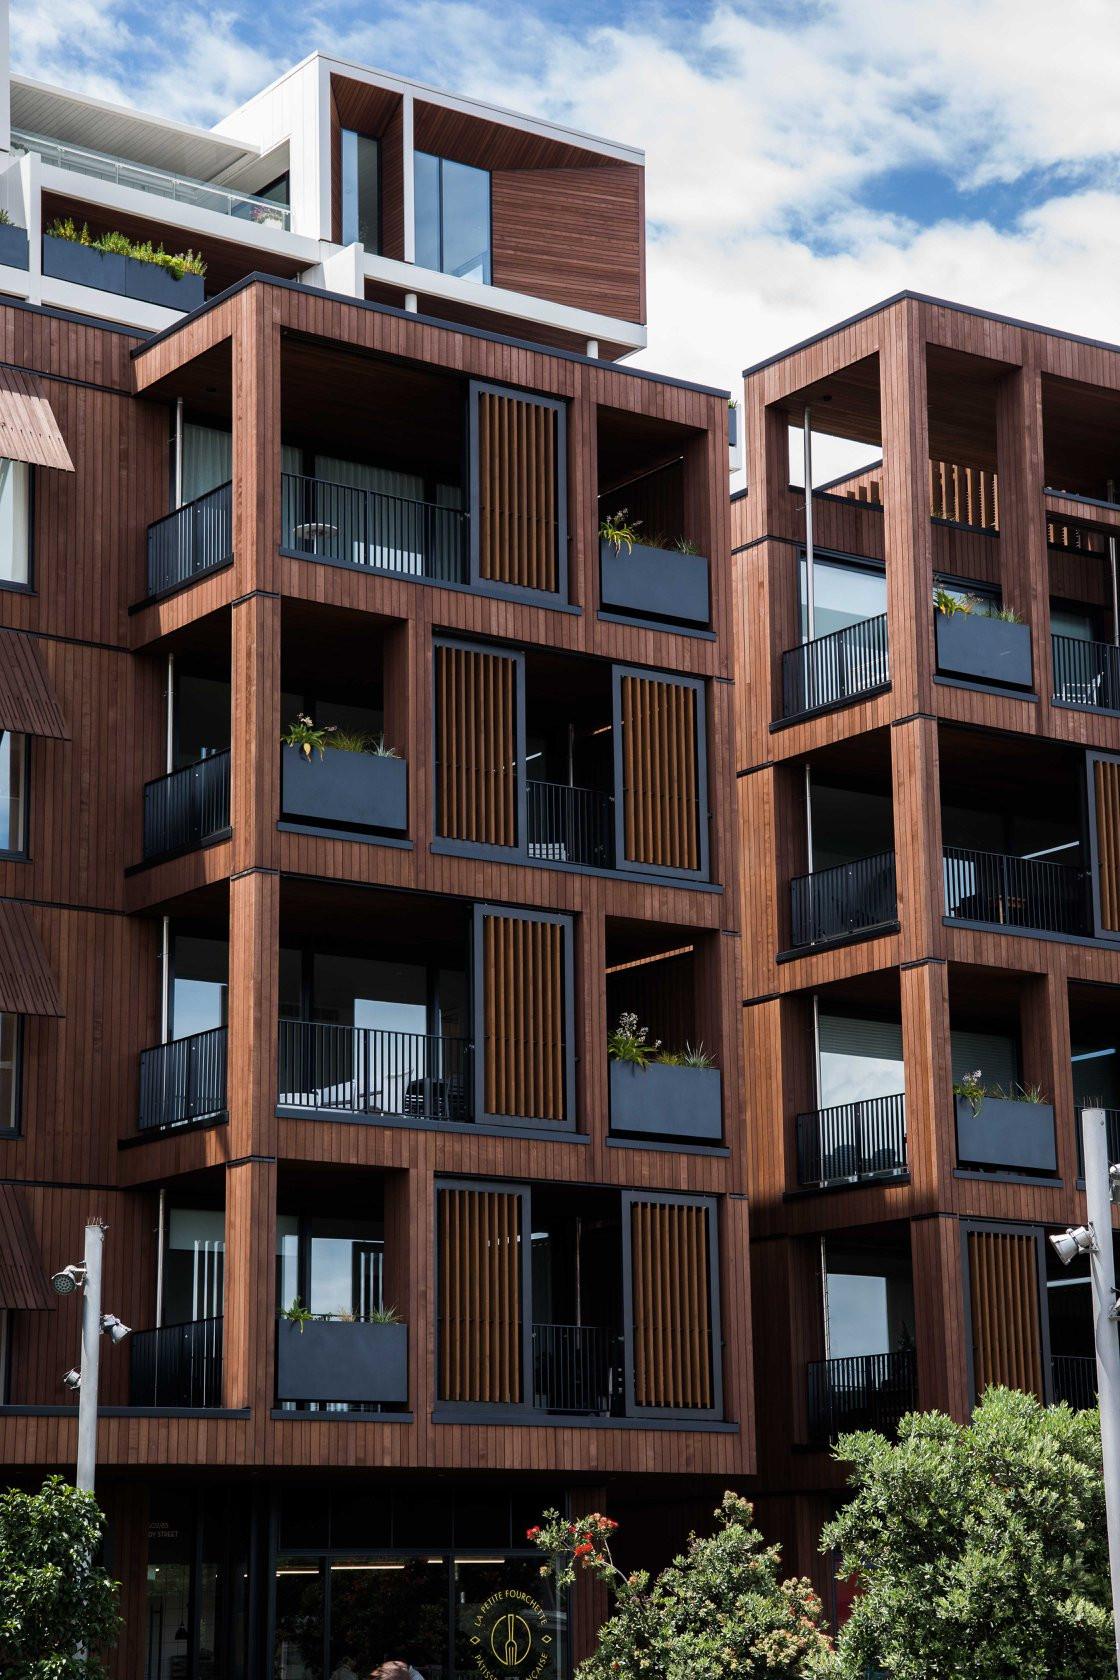 Wood-finished apartment building with glass balustrades and recessed balconies